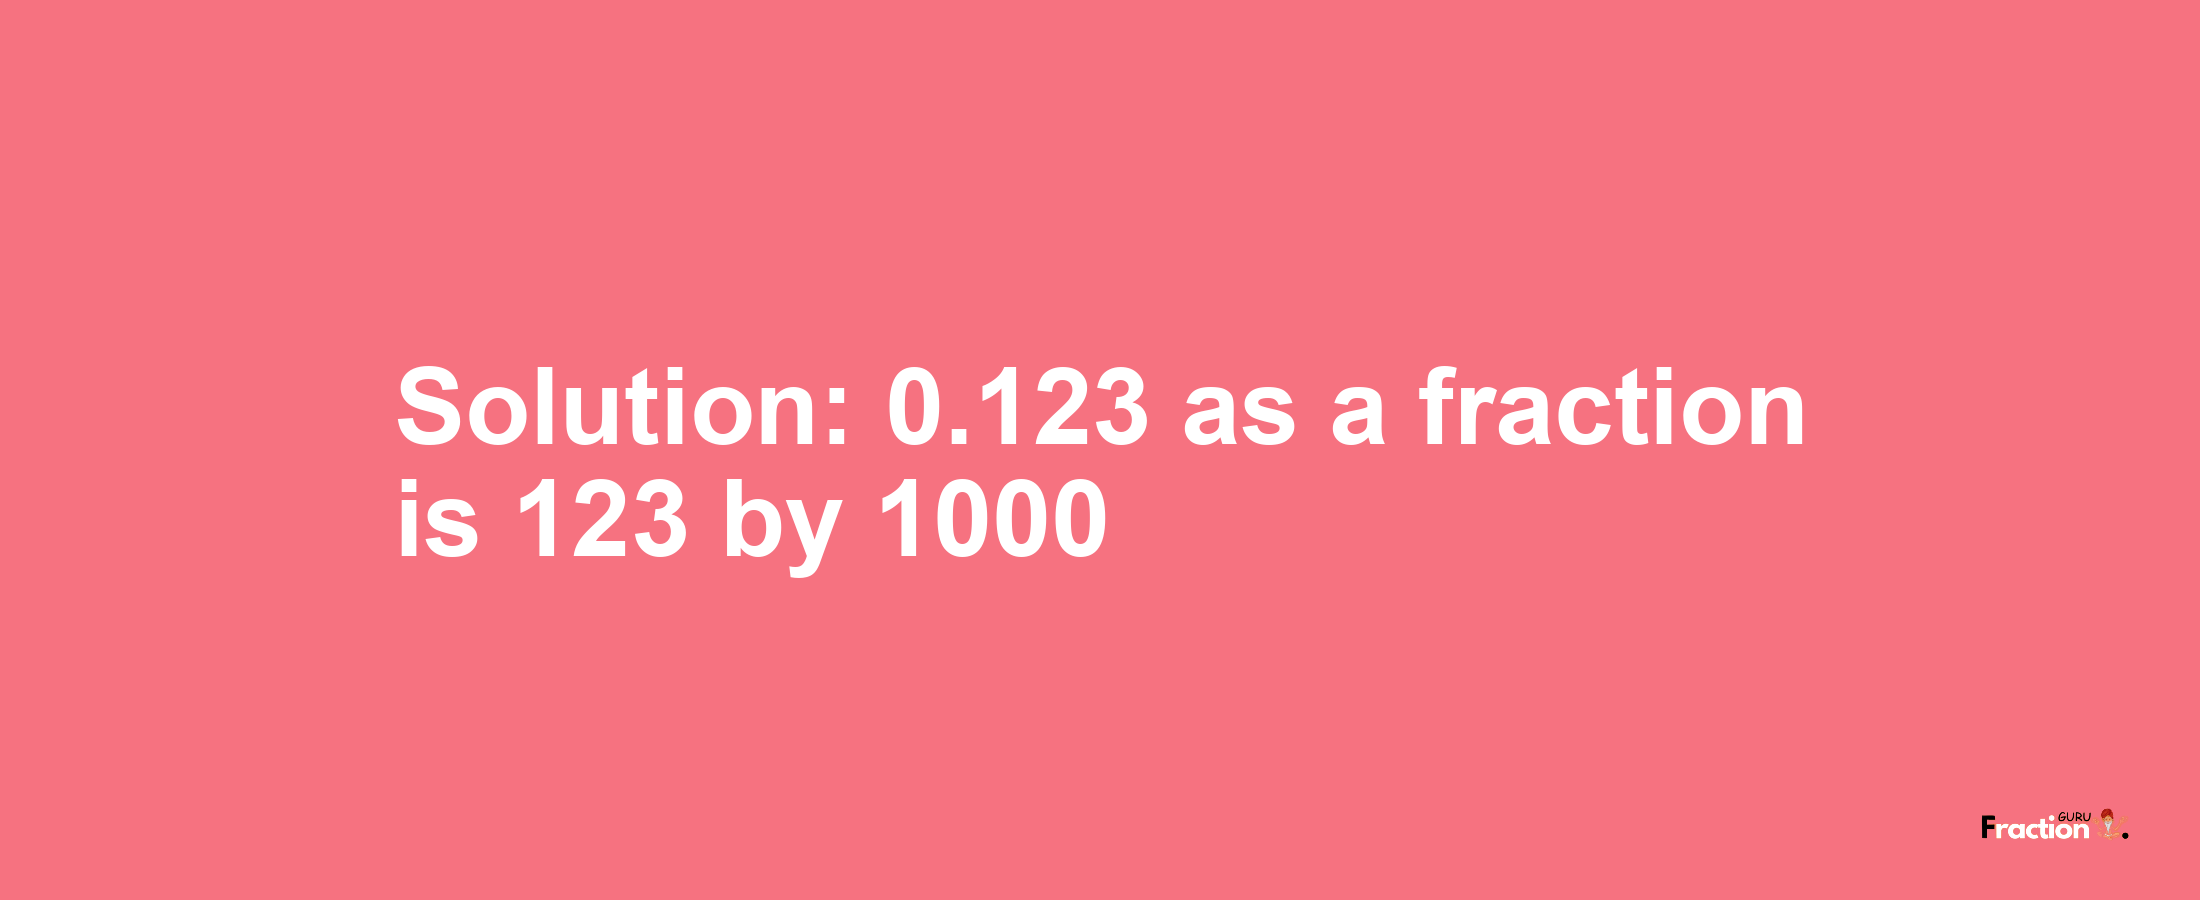 Solution:0.123 as a fraction is 123/1000